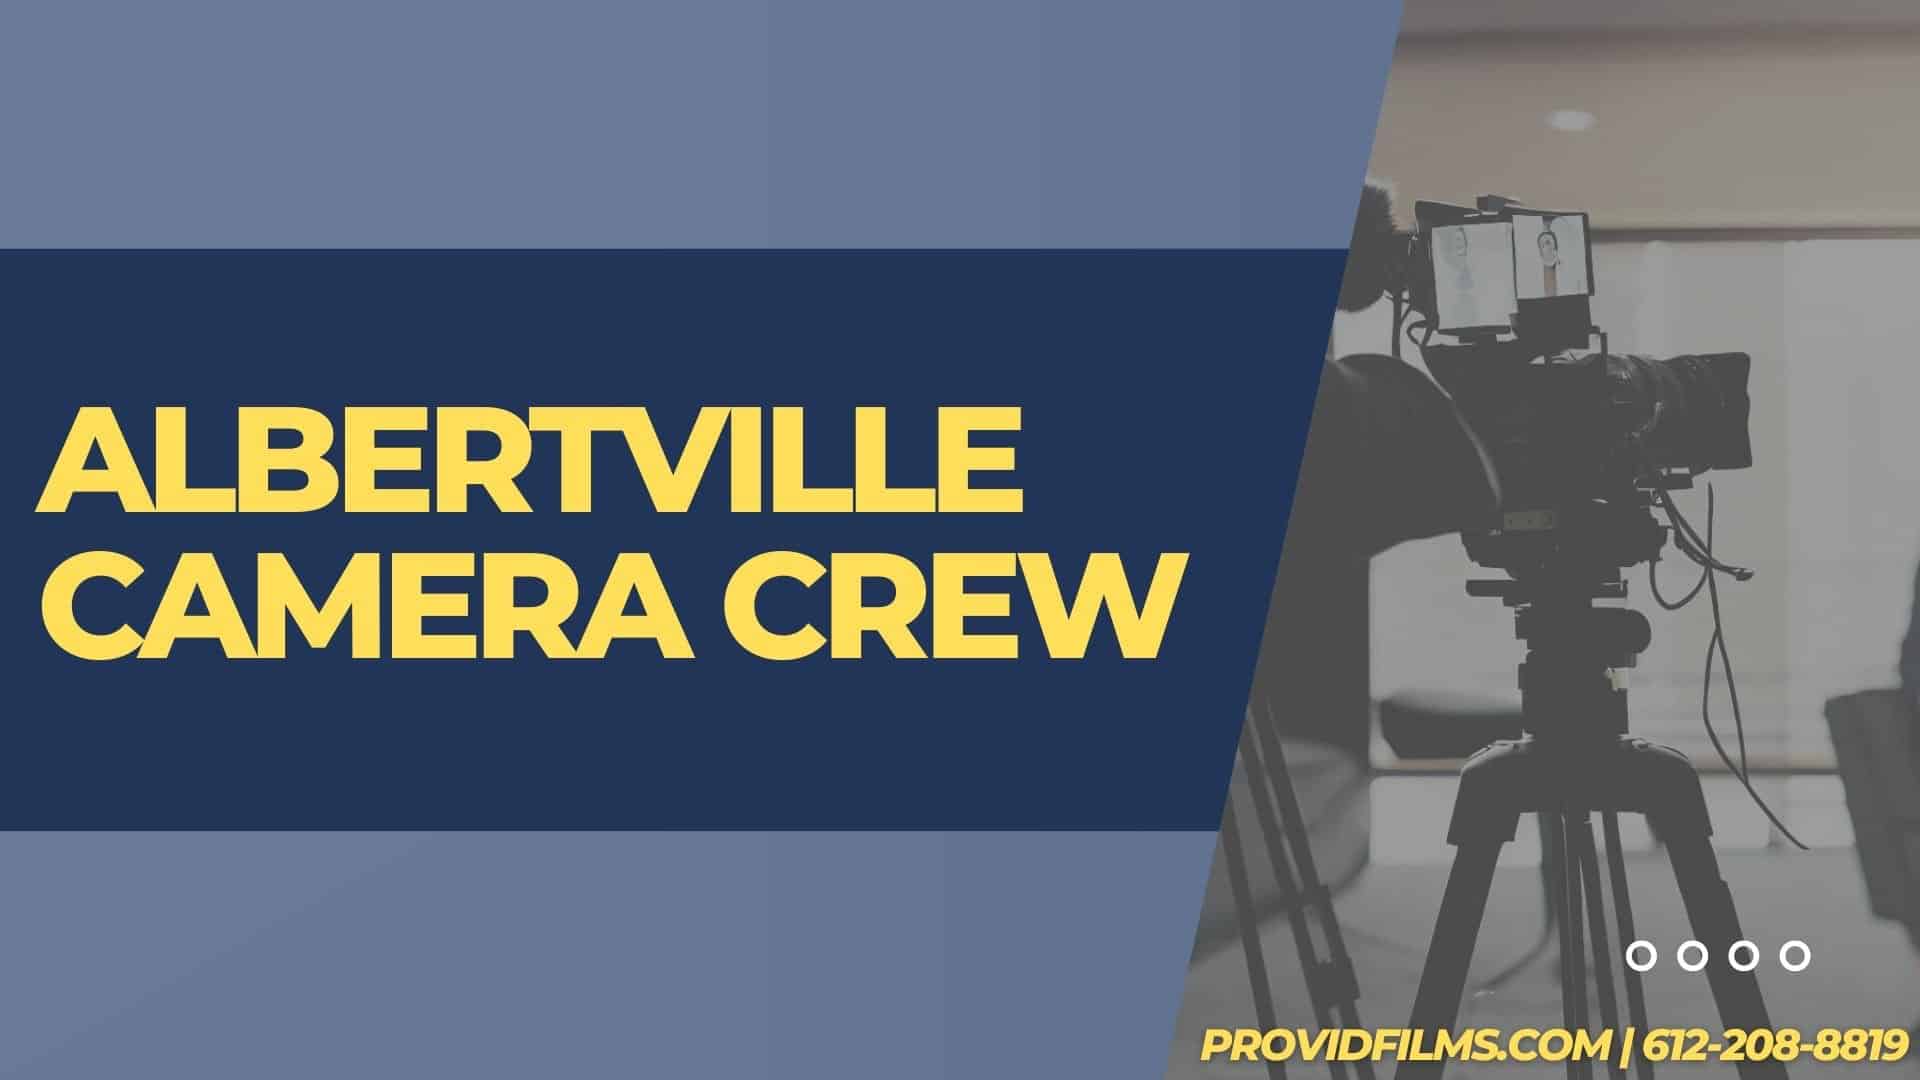 Graphic of a video camera with the text saying "Albertville Camera Crew"<br />
